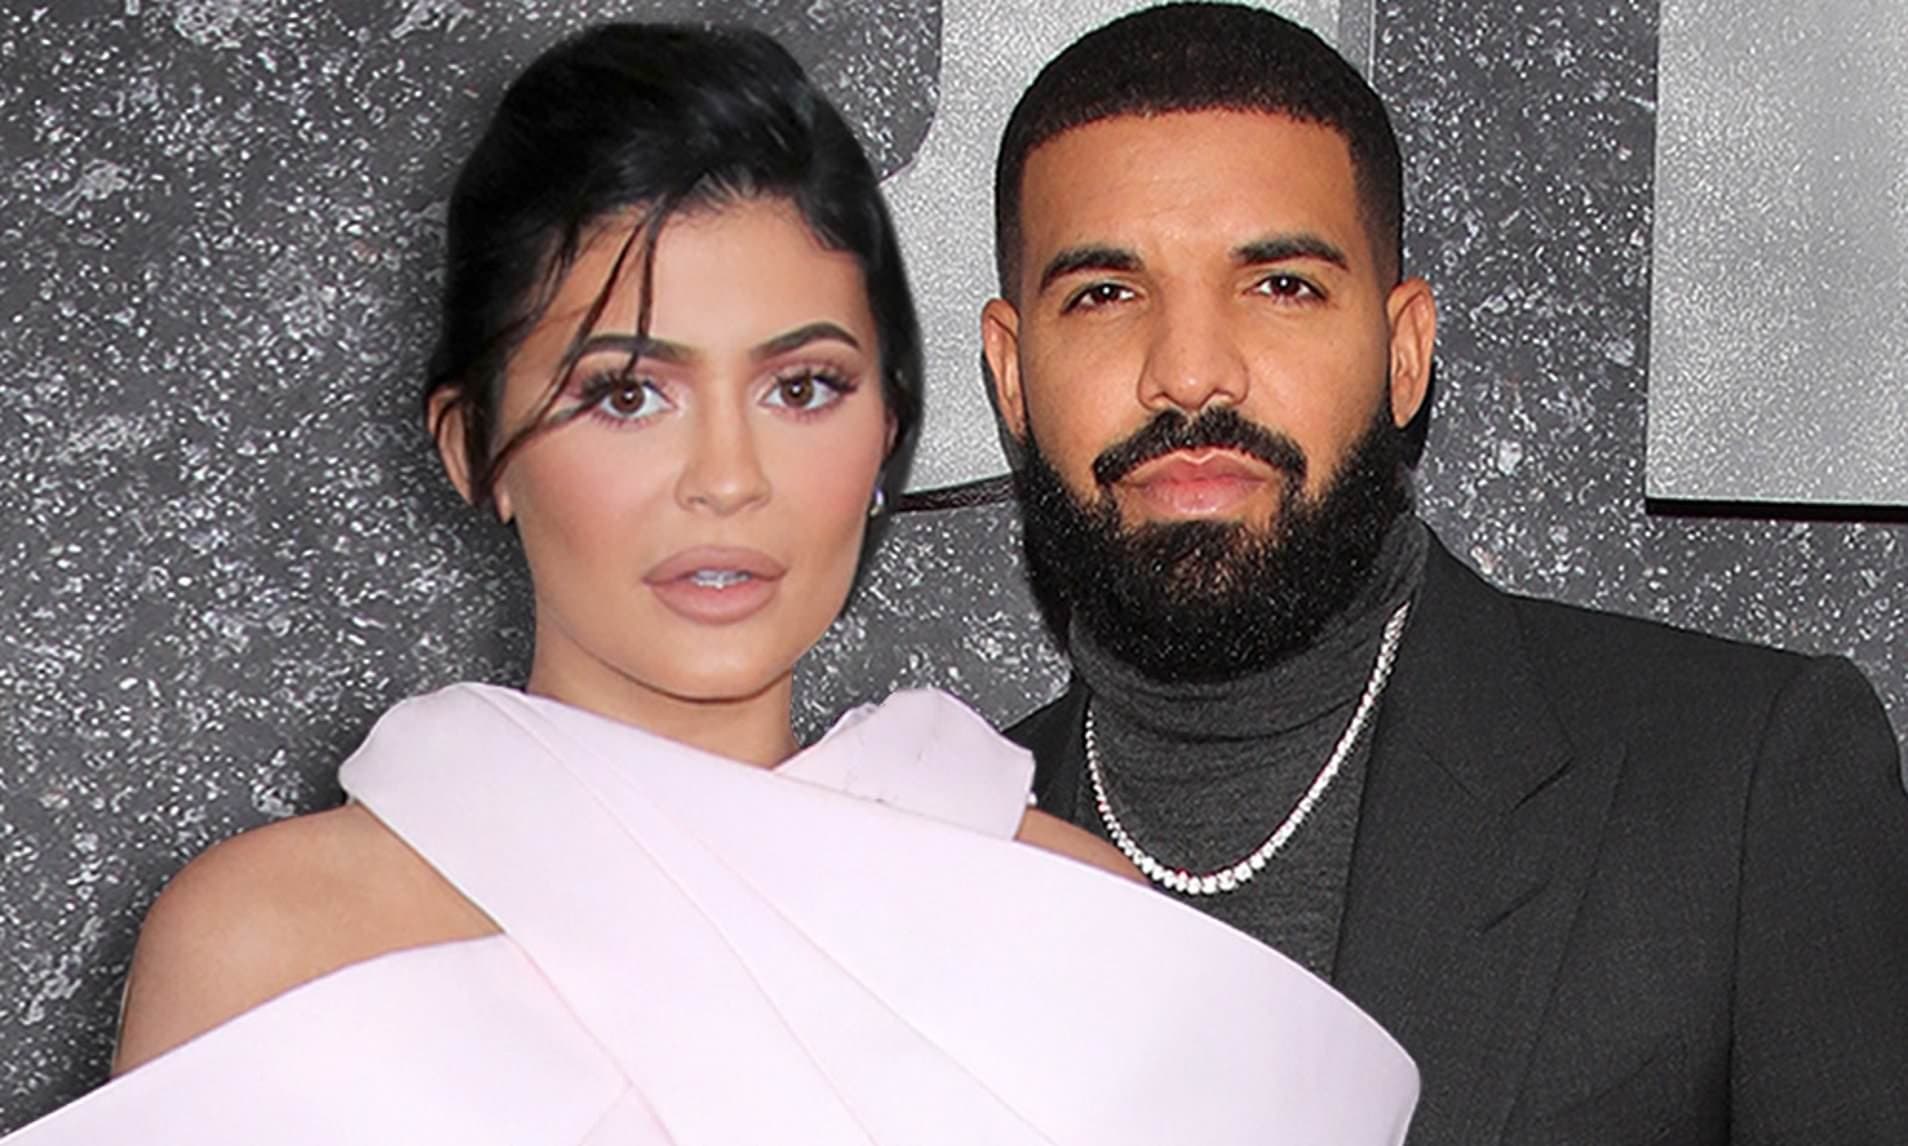 Drake and Kylie Jenner Have Feelings for Each Other